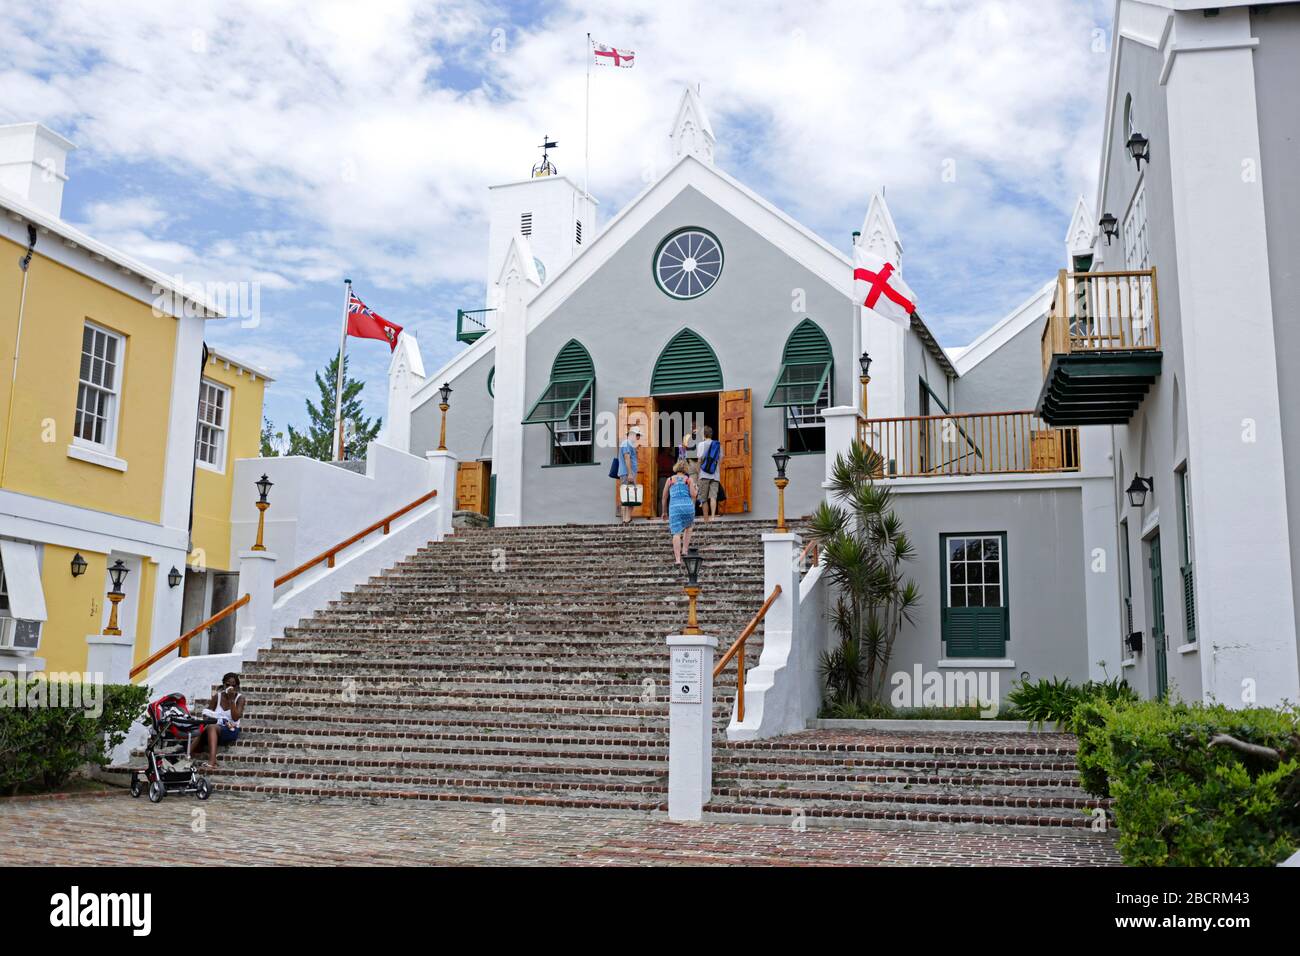 Their Majesties Chappell, St. Peter's Church, in St. George's, Bermuda, is the oldest surviving Anglican church in continuous use outside the British Stock Photo